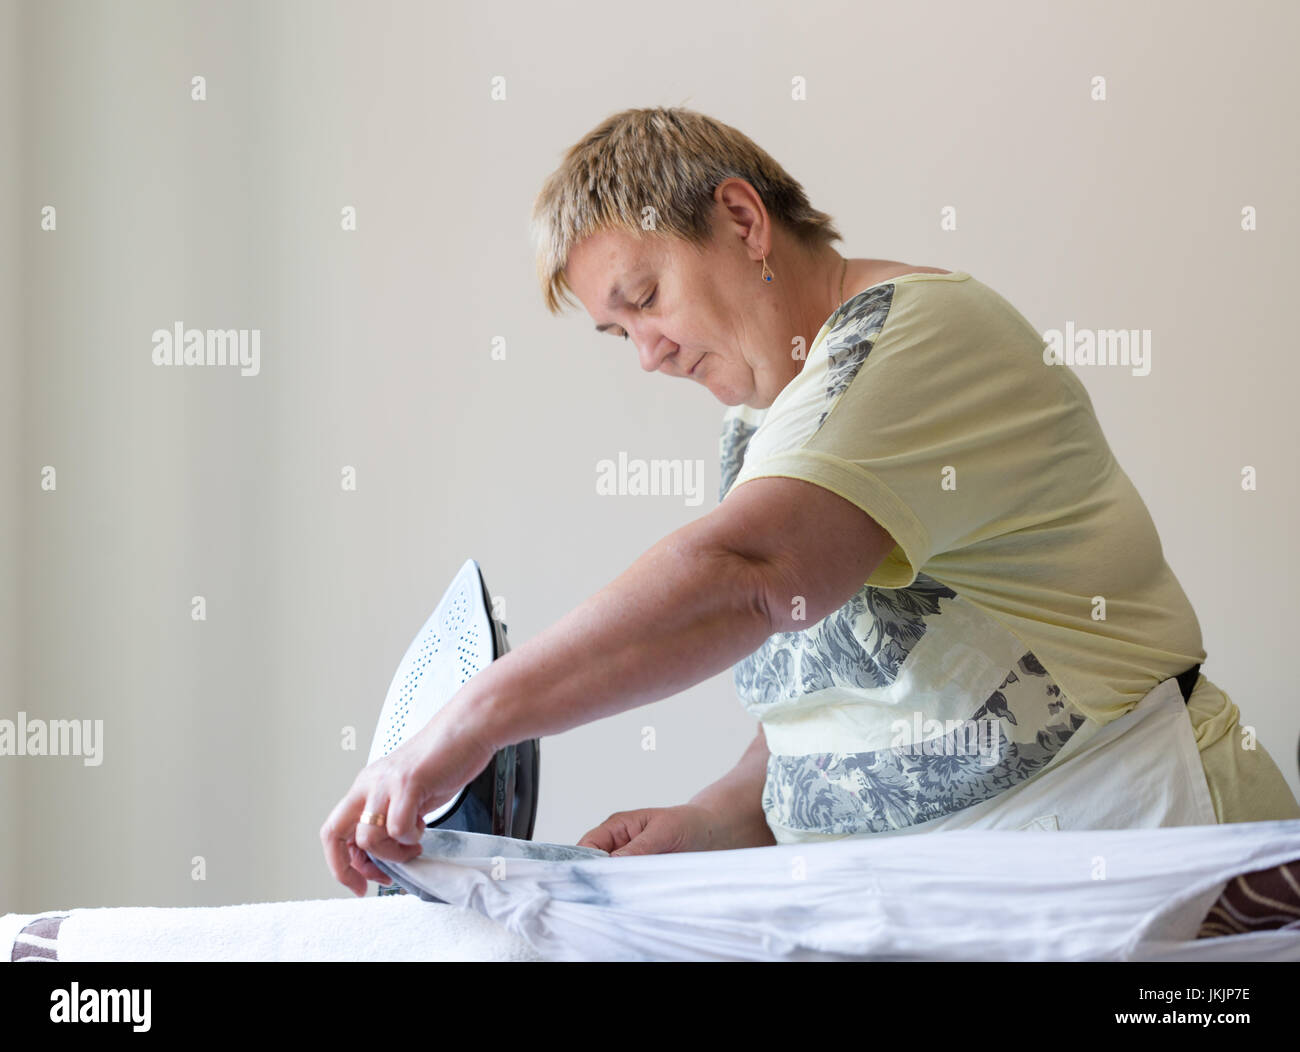 Senior woman ironing washed cloths in light room. Horizontal orientantion with selective focus on working hands with black iron. Direct front view Stock Photo